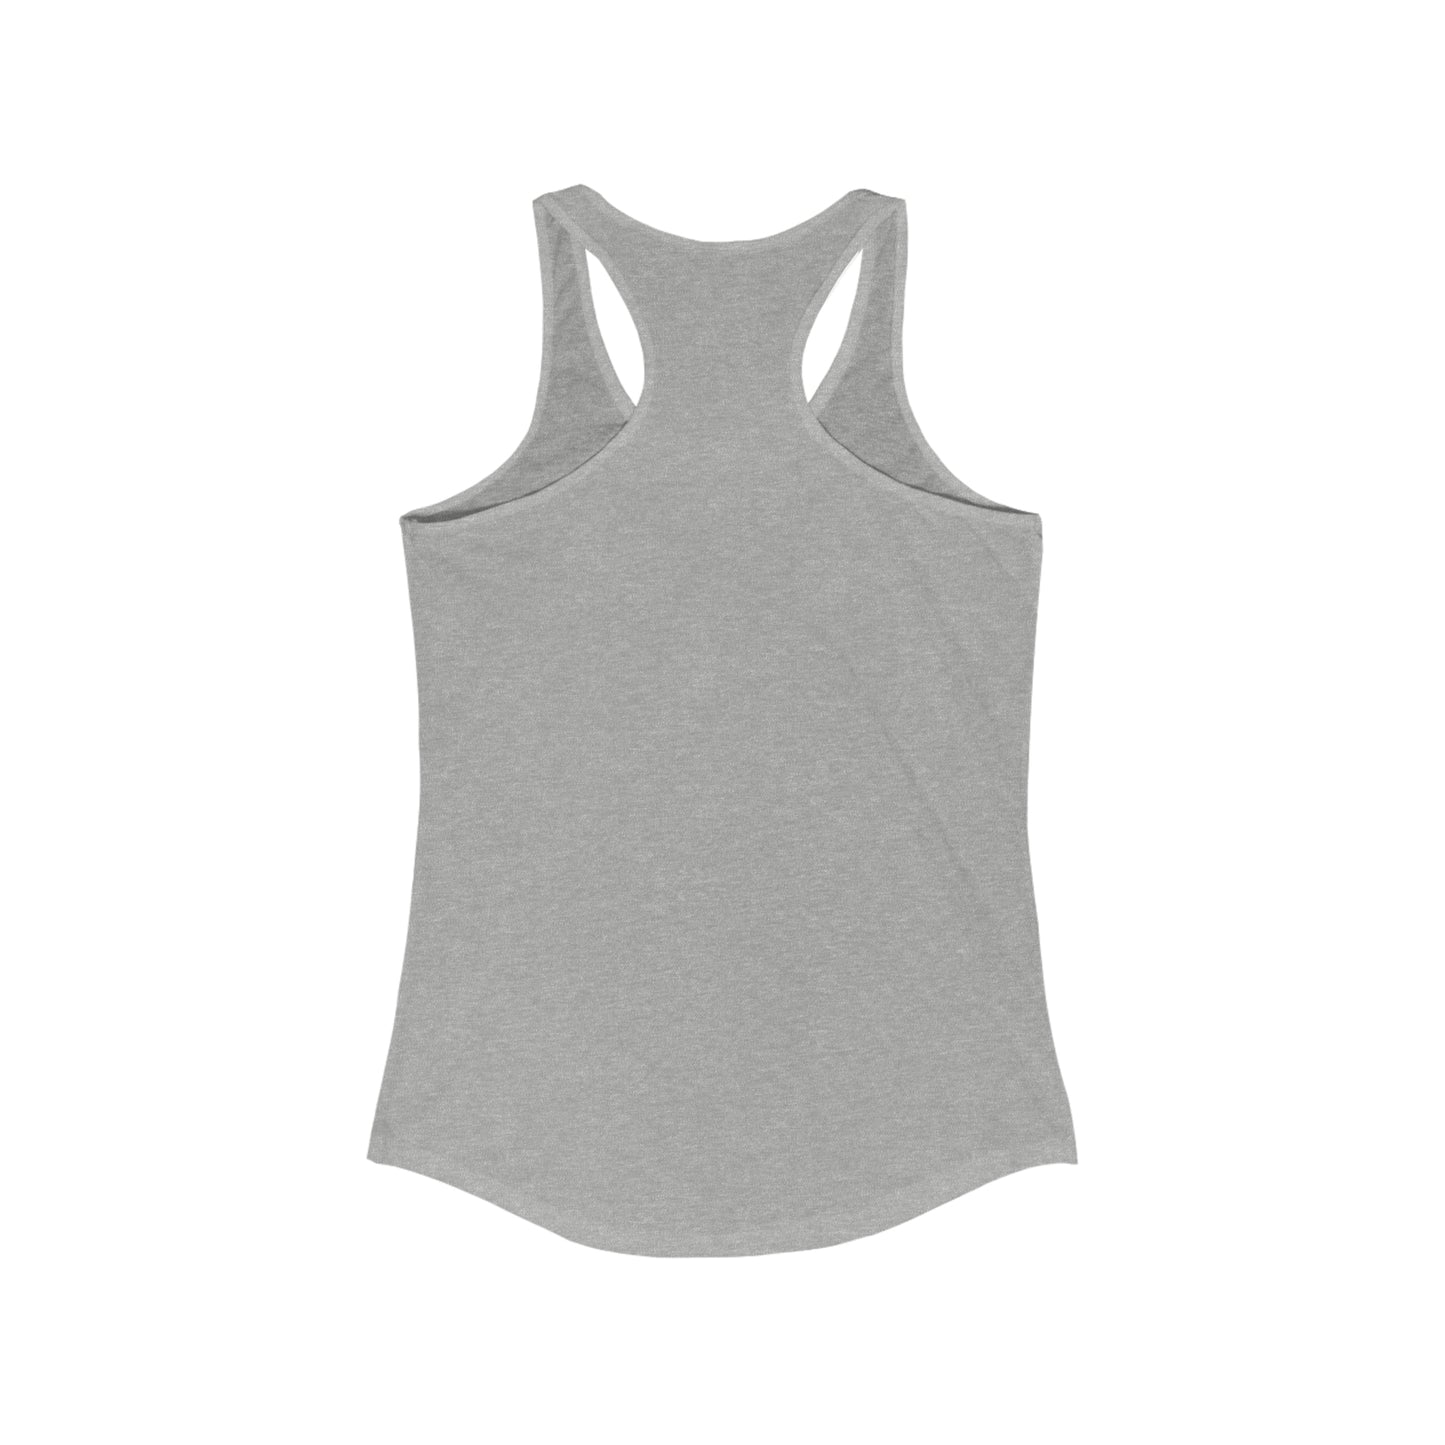 Cats and Cruises - Tank Top